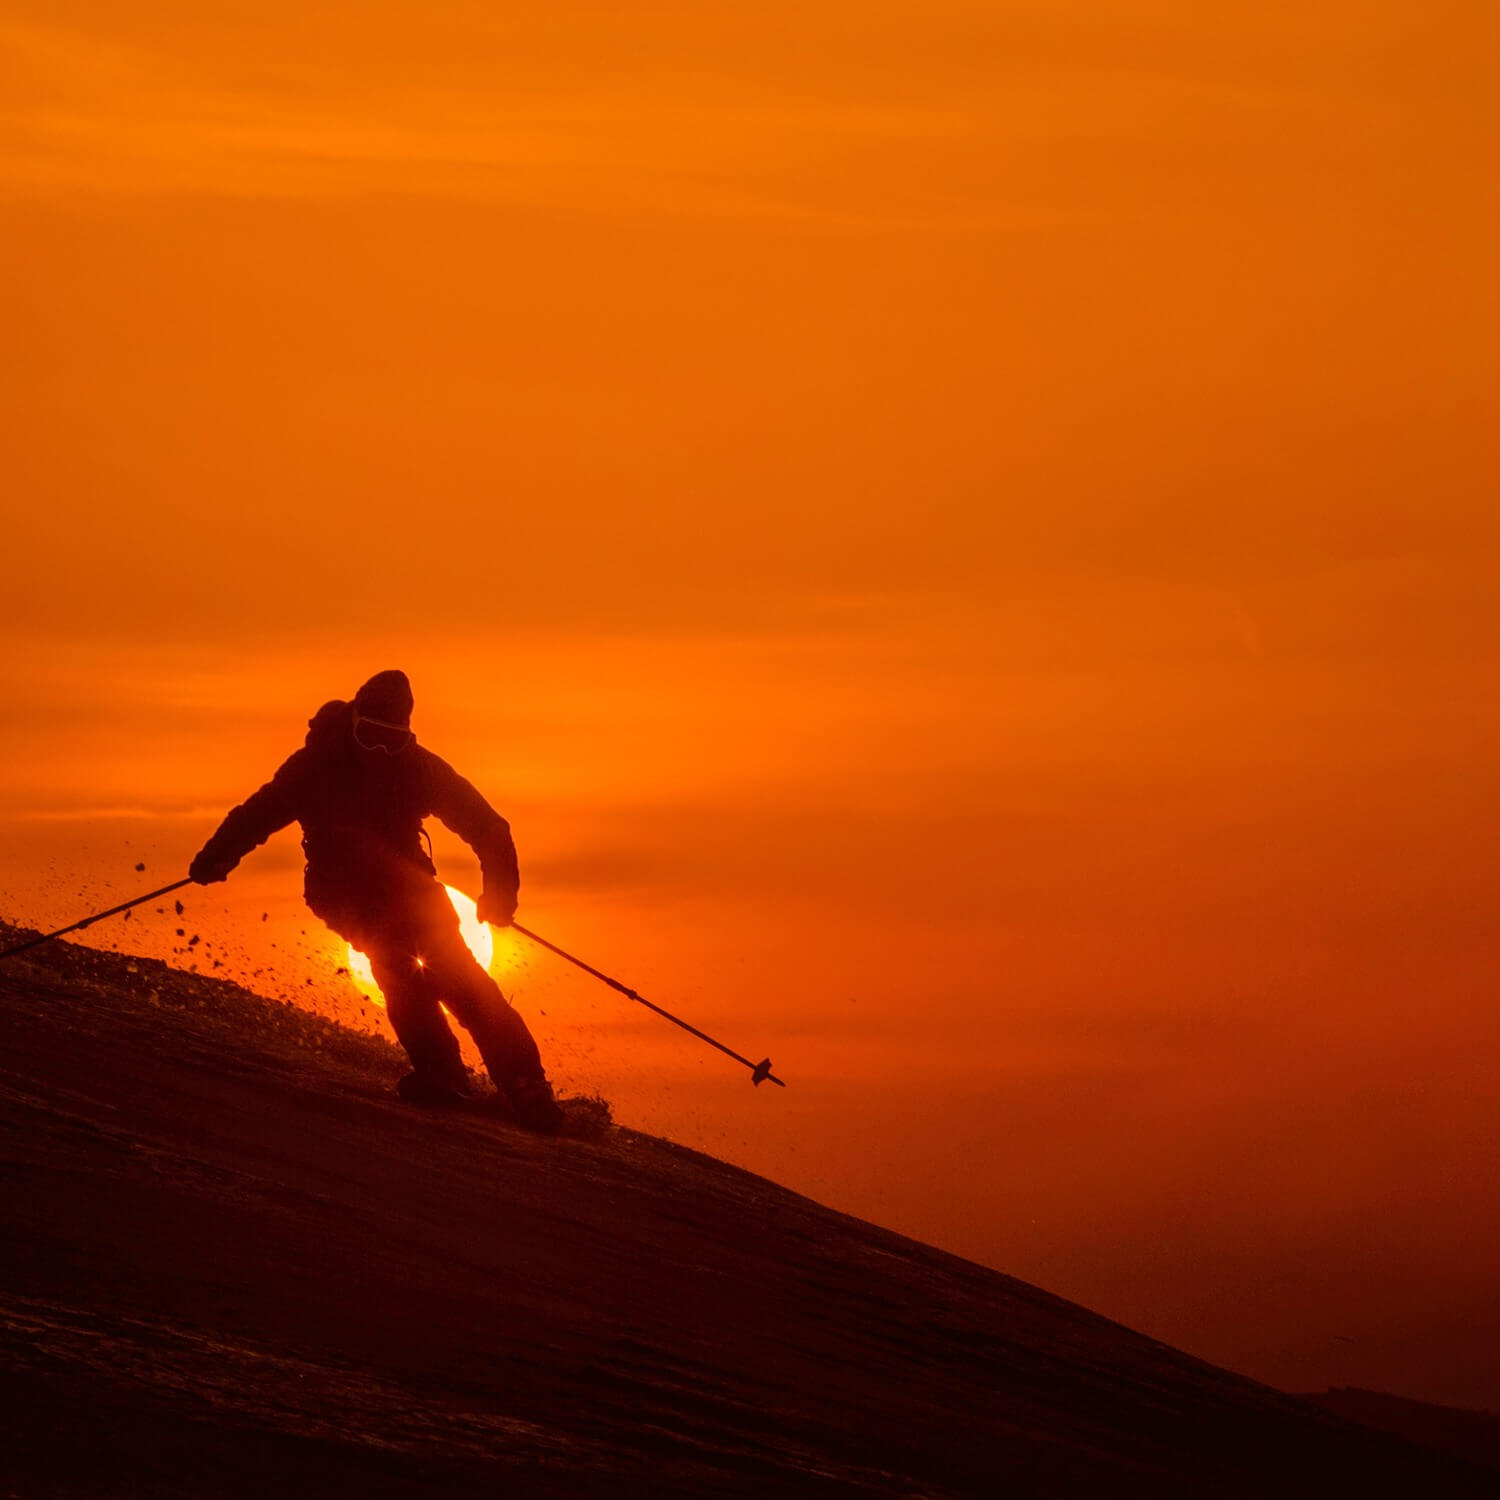 Unrecognizable skier shredding the fresh untouched snow on the steep hill at sunset. Breathtaking shot of extreme pro skier speeding down the snowy mountain on a beautiful evening in Niseko = Shutterstock